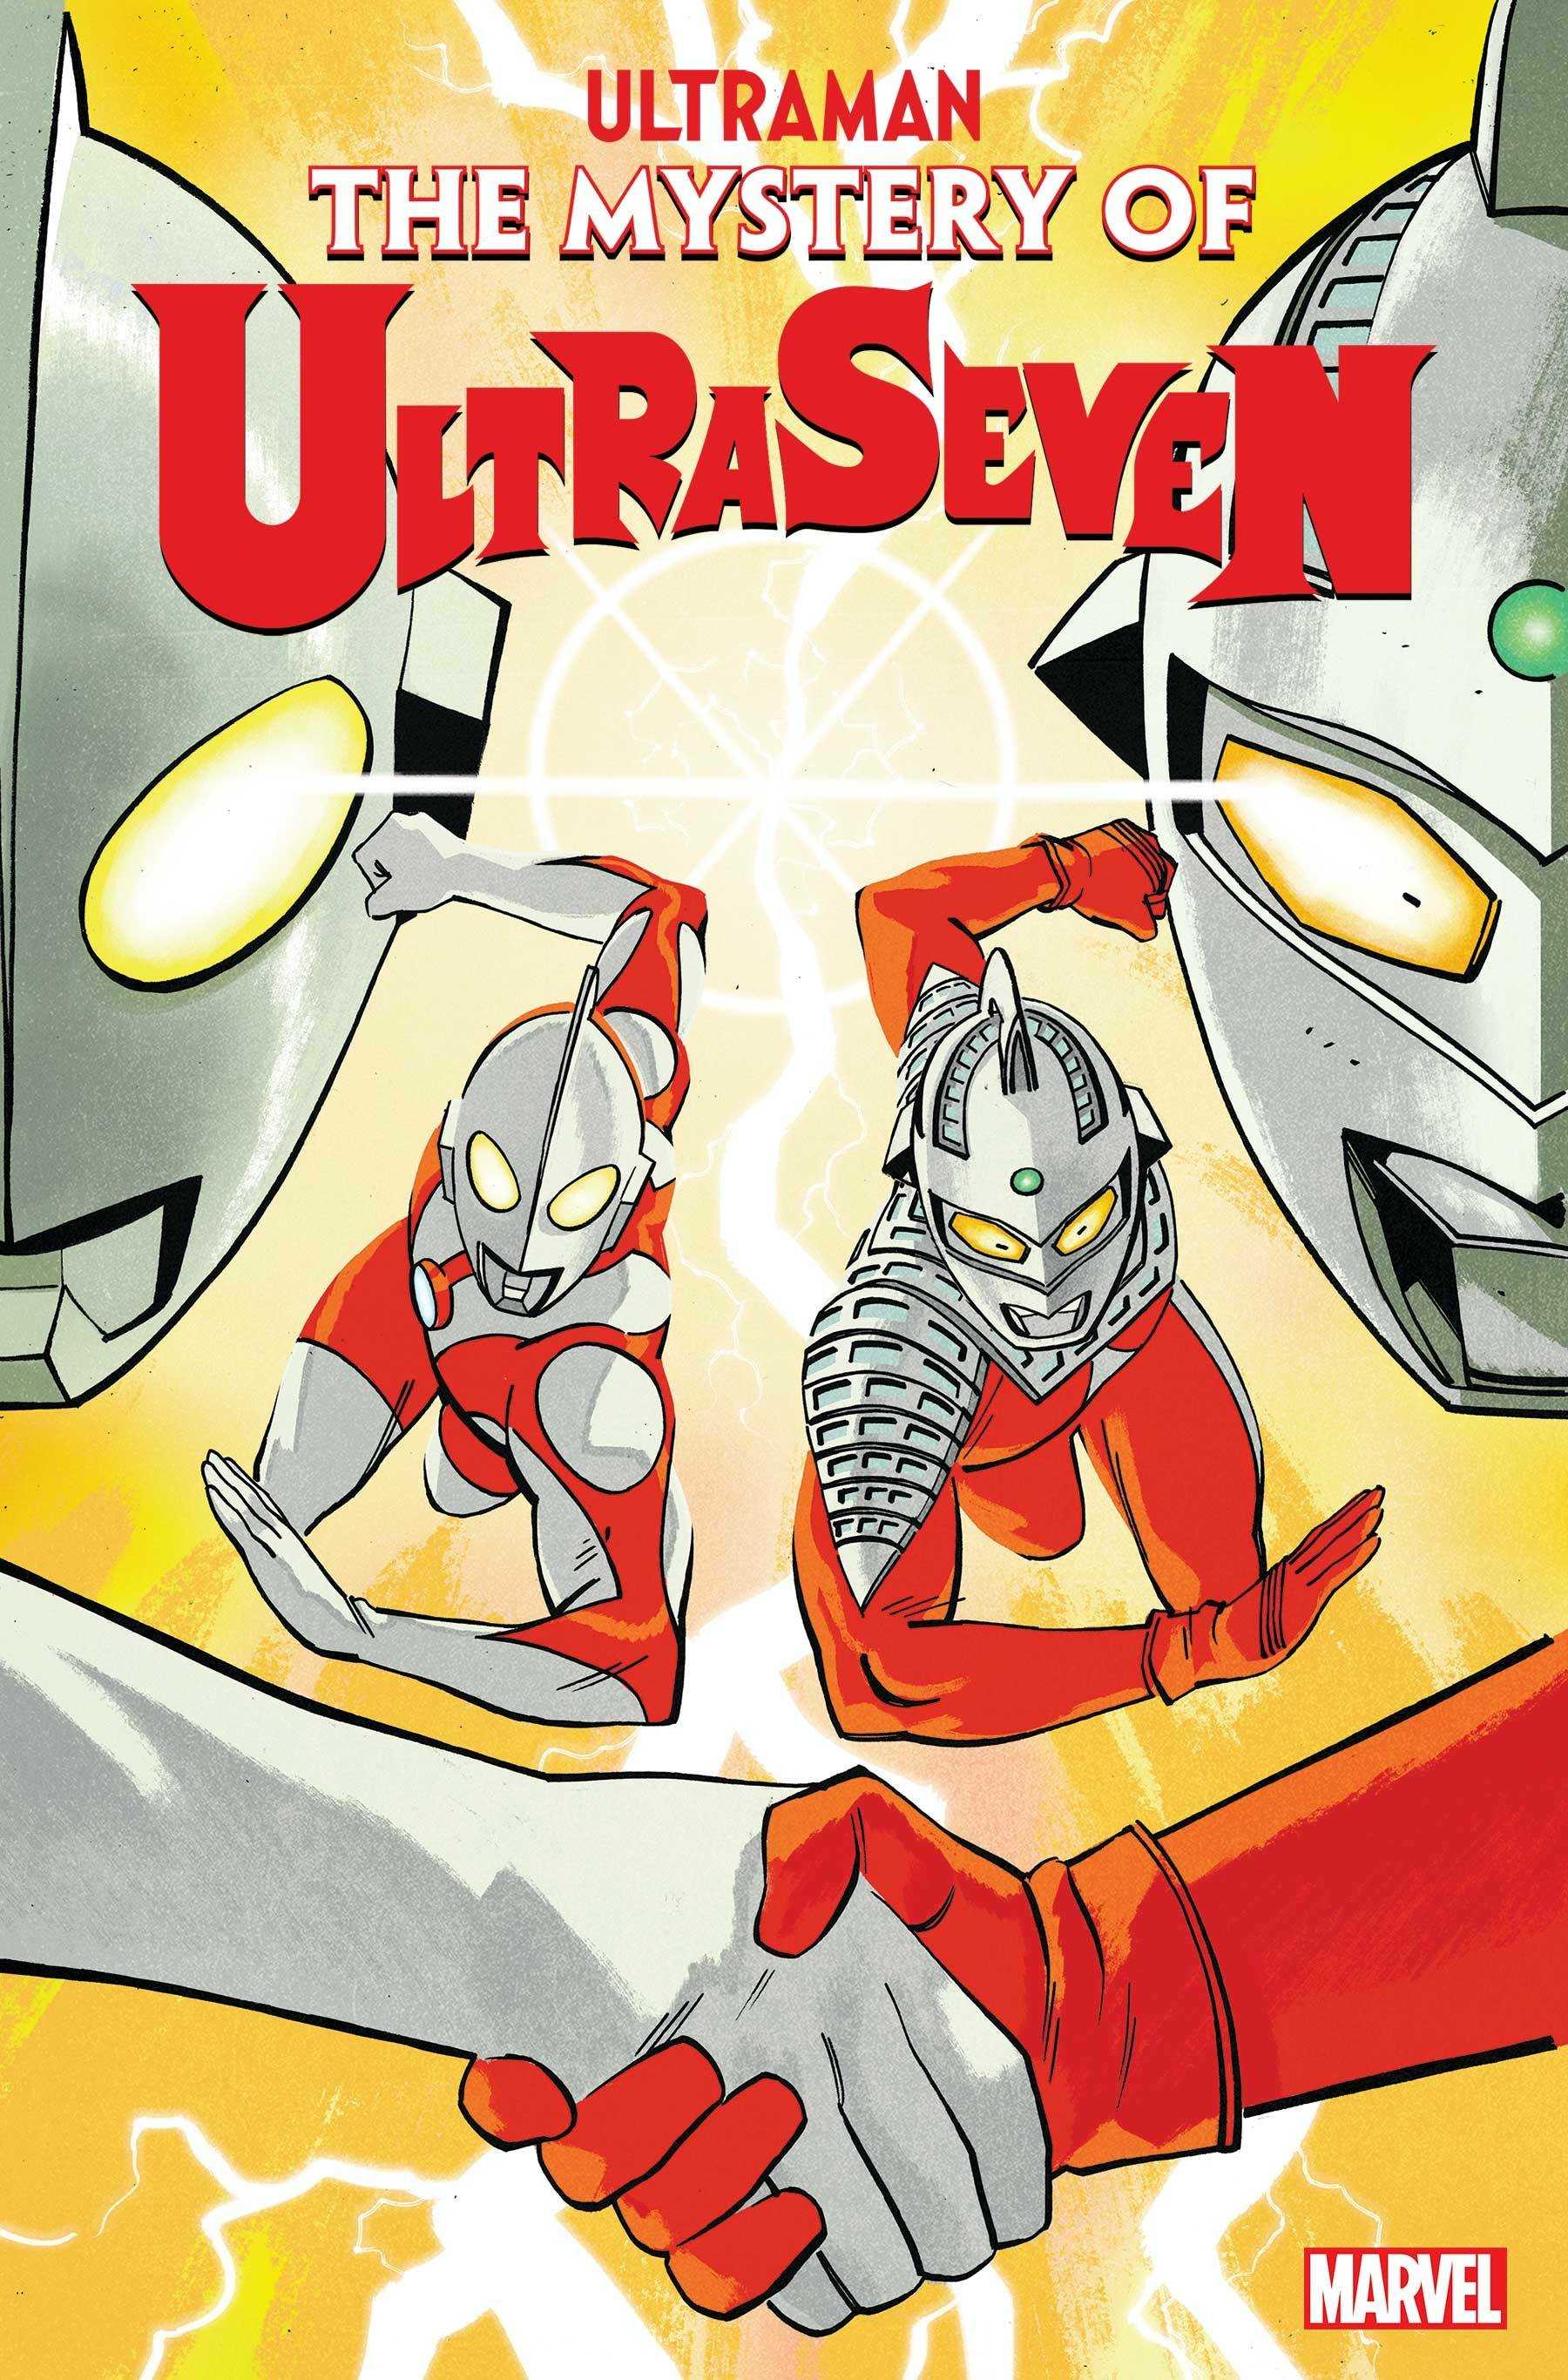 The Mystery of Ultraseven Issue Two Variant- Tom Reilly